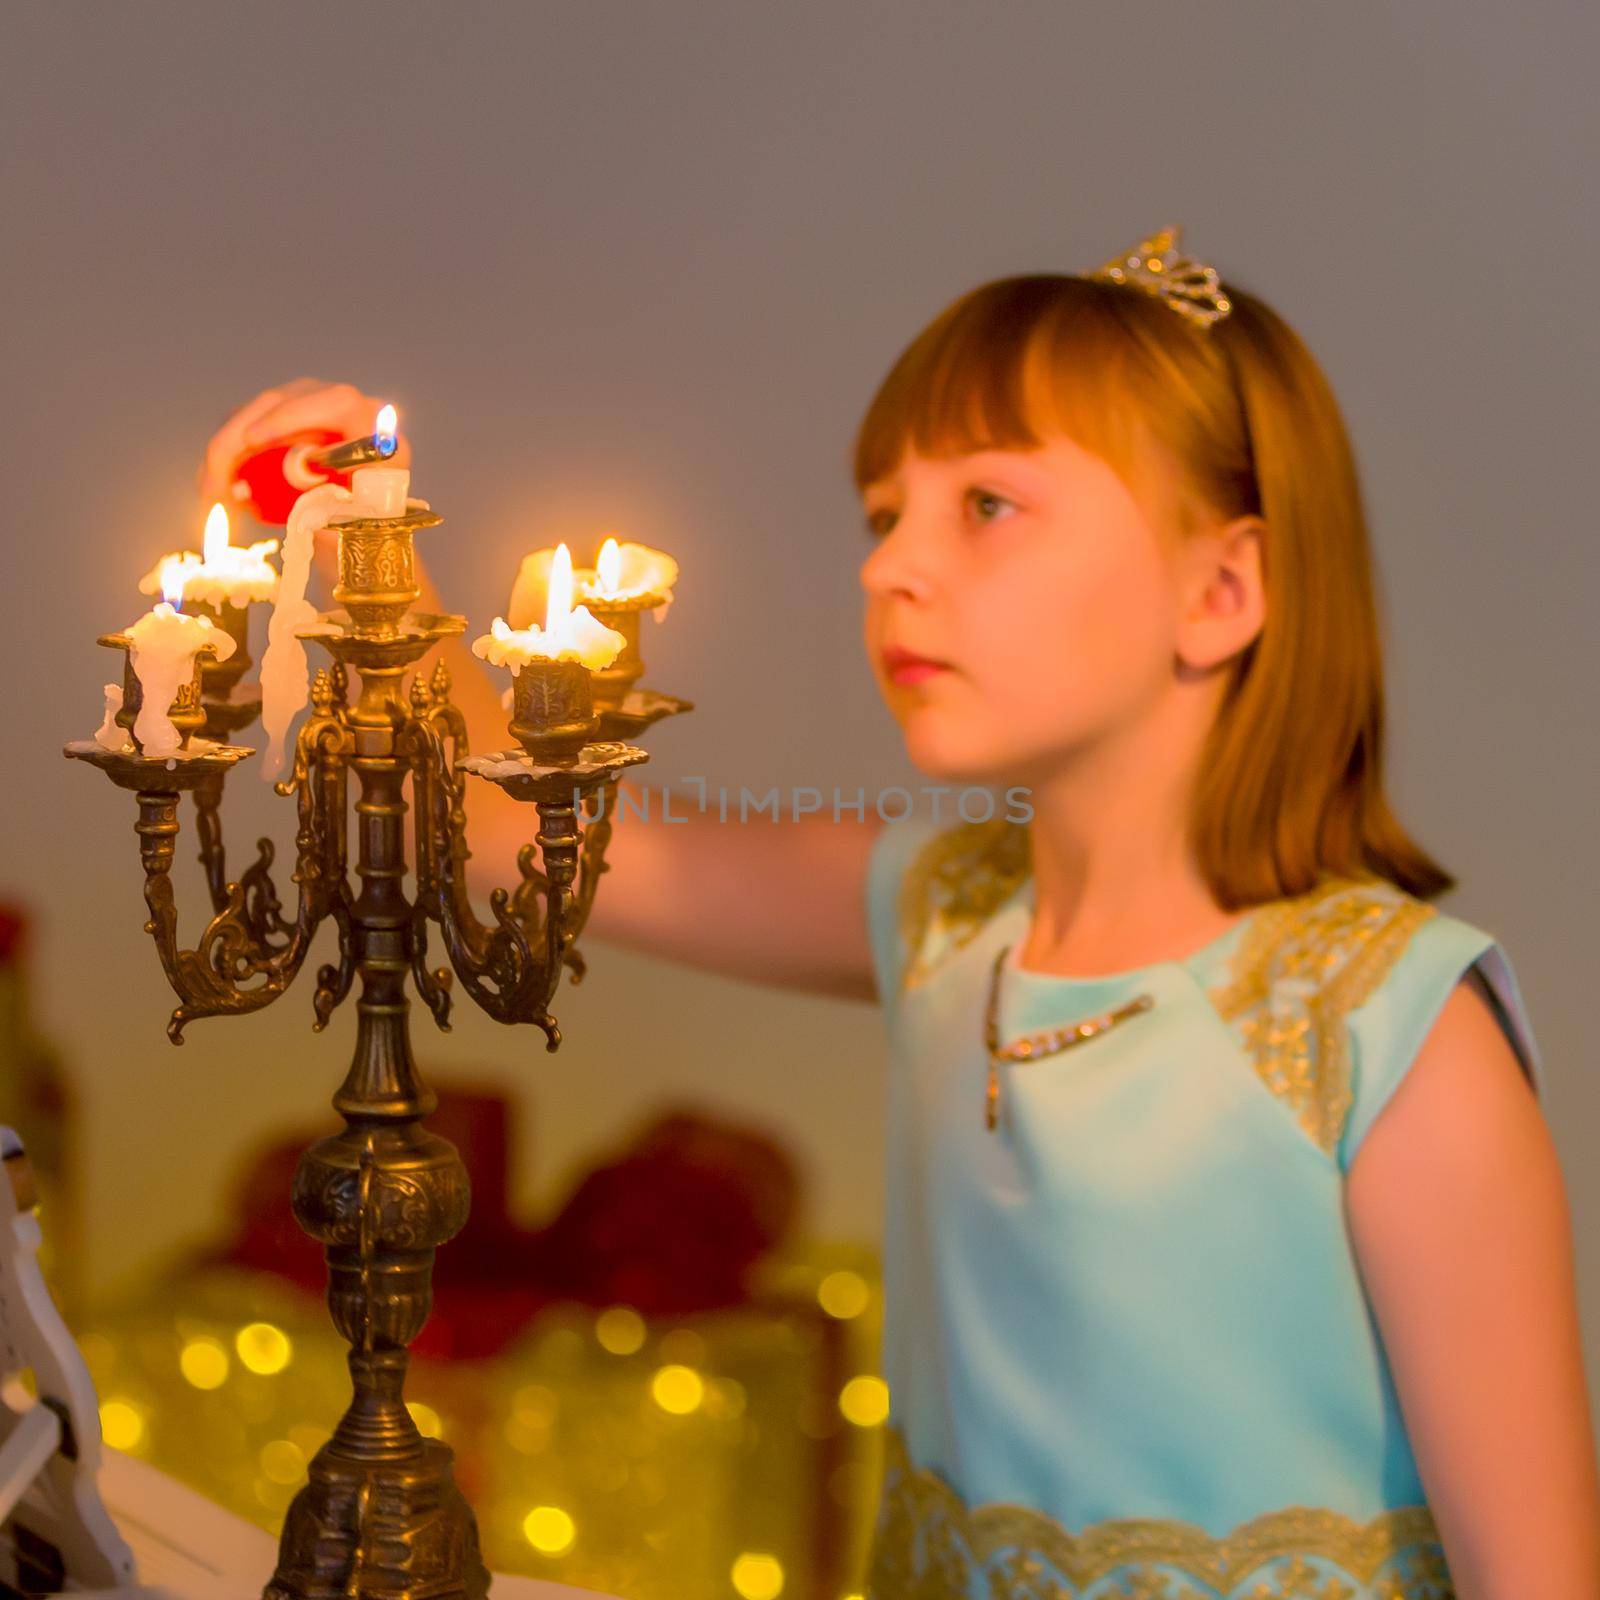 Romantic little girl lights candles on Christmas night. Family holidays concept.